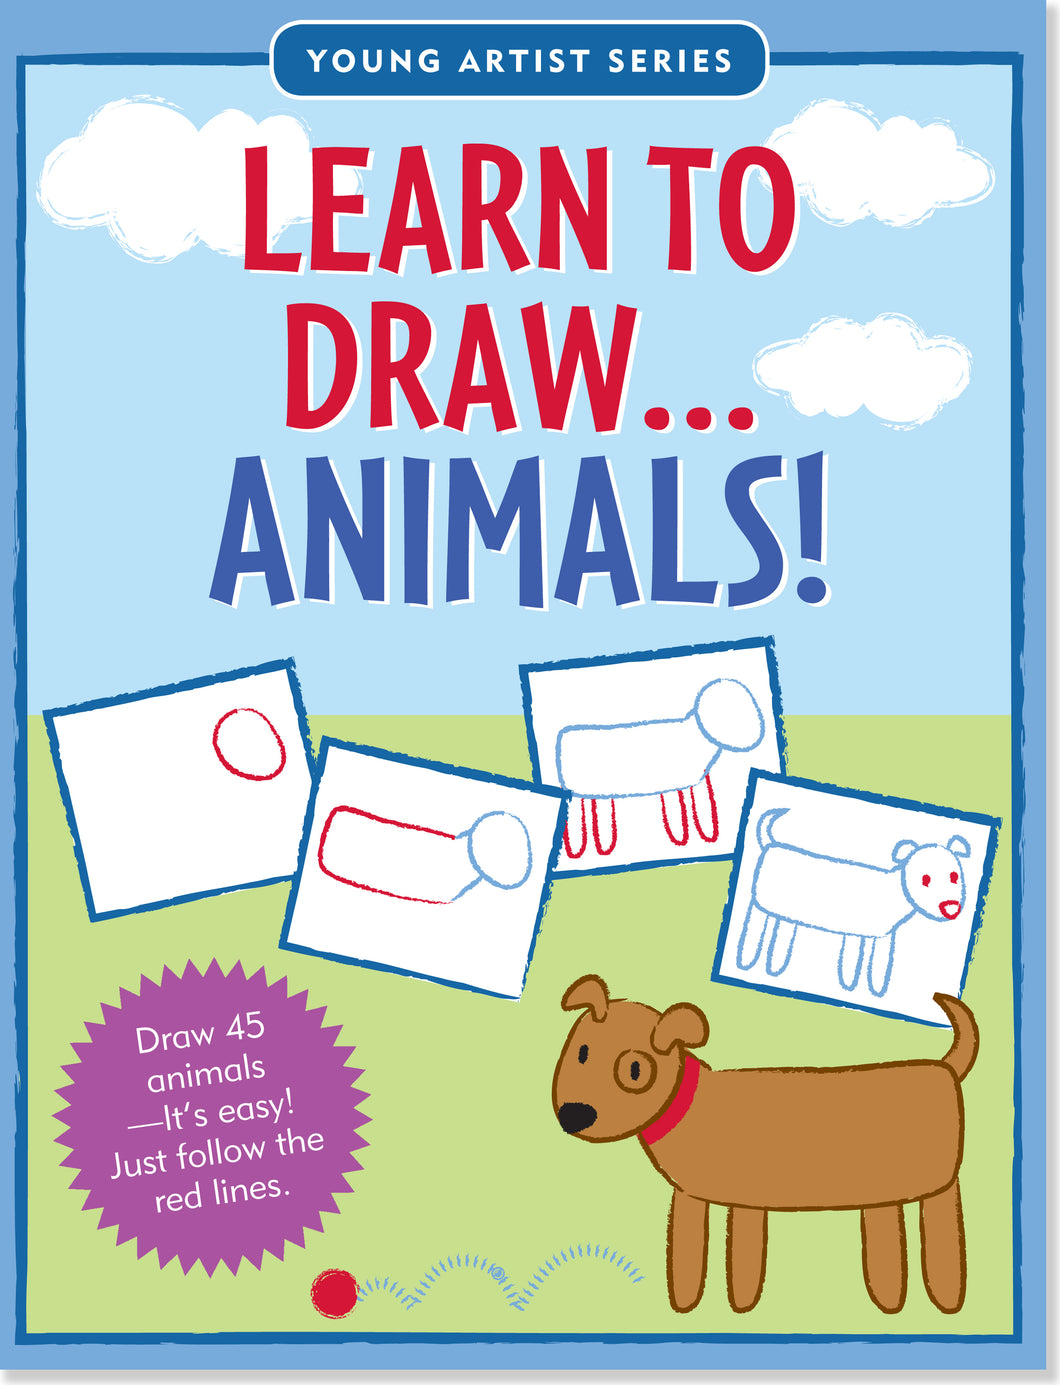 Learn to Draw Animals!